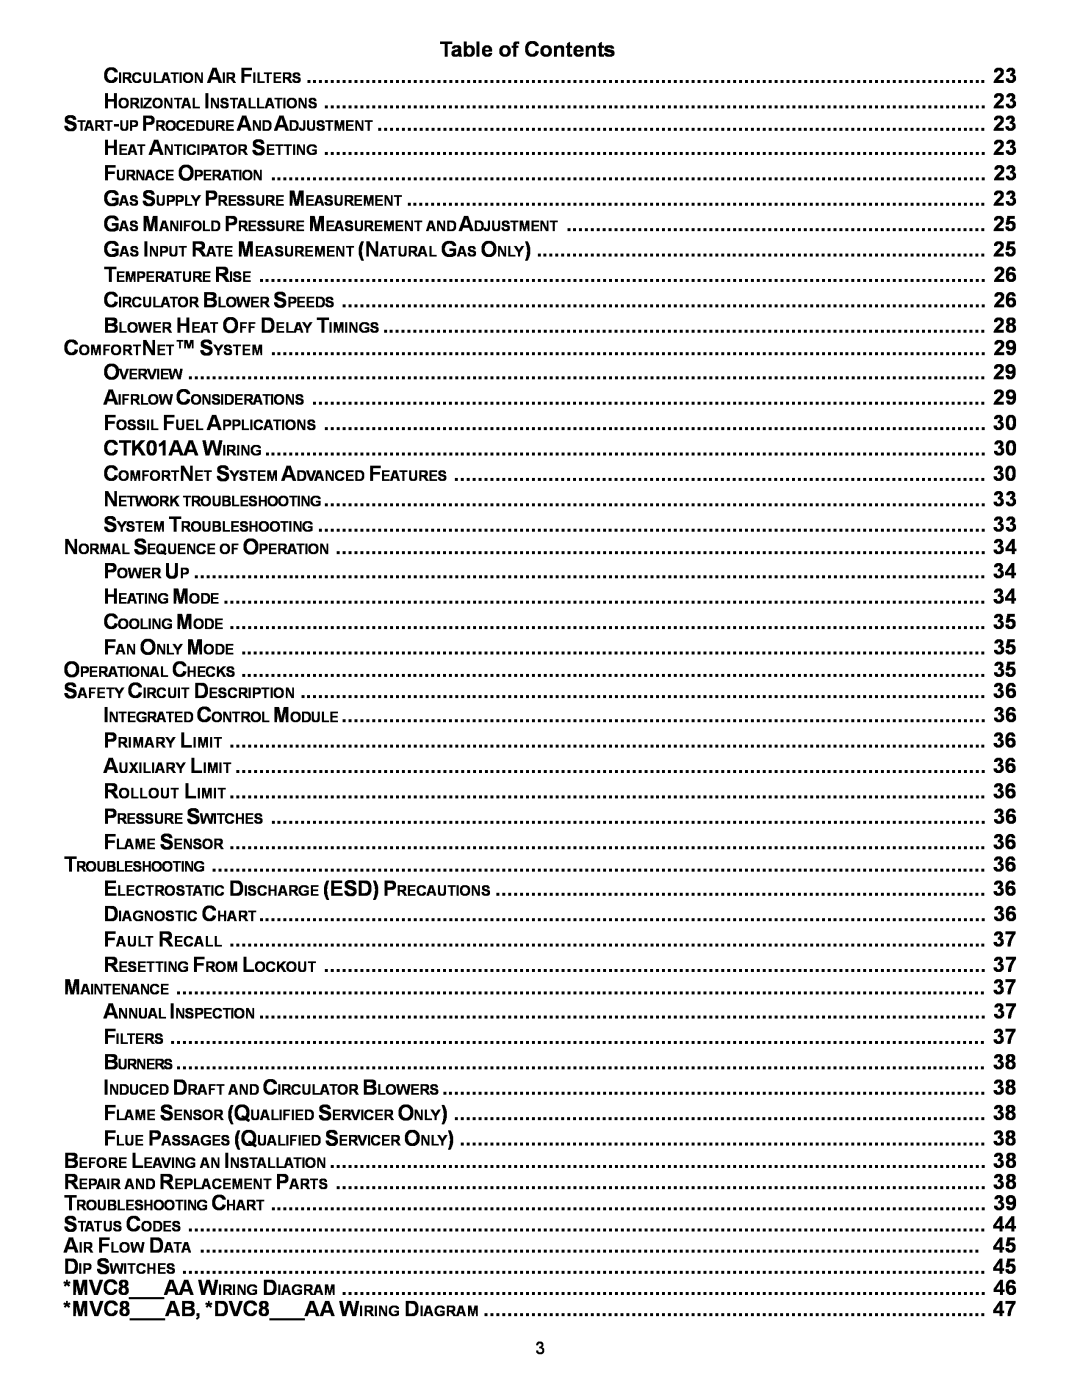 Goodman Mfg VC8 instruction manual Table of Contents 